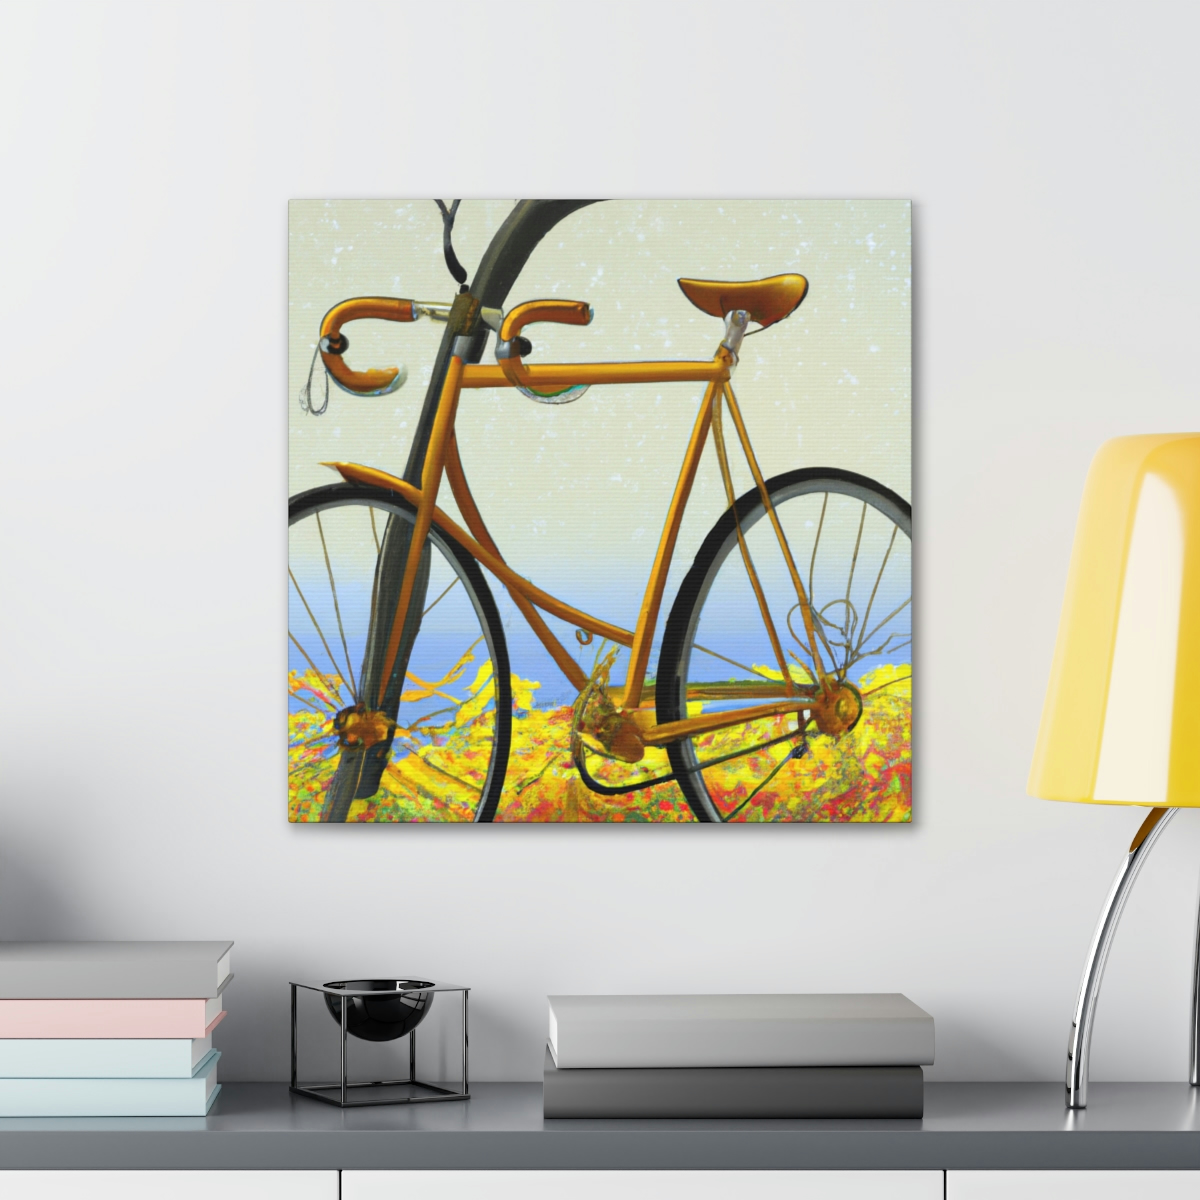 Check out our new piece.  Thoughts? 🖌️🎨#ArtNouveau #CanvasPainting #Pinting #VintageBicycle #ClassicStyle #HomeDecor #WallArt #MyArt #InteriorDesign #Elegance #Nostalgia